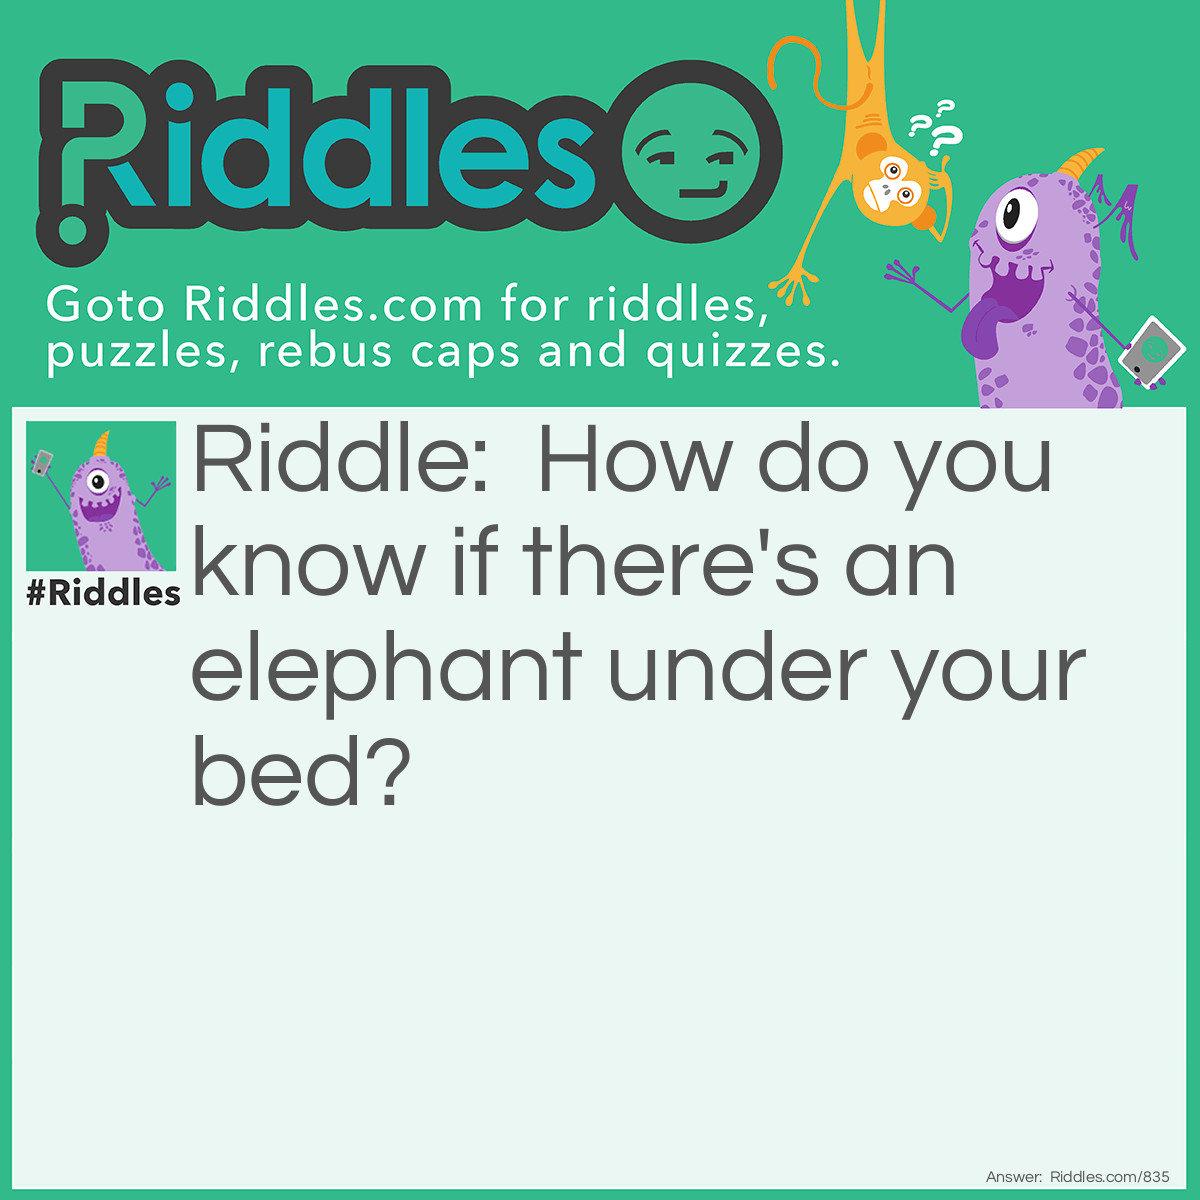 Riddle: How do you know if there's an elephant under your bed? Answer: You bump your nose on the ceiling.